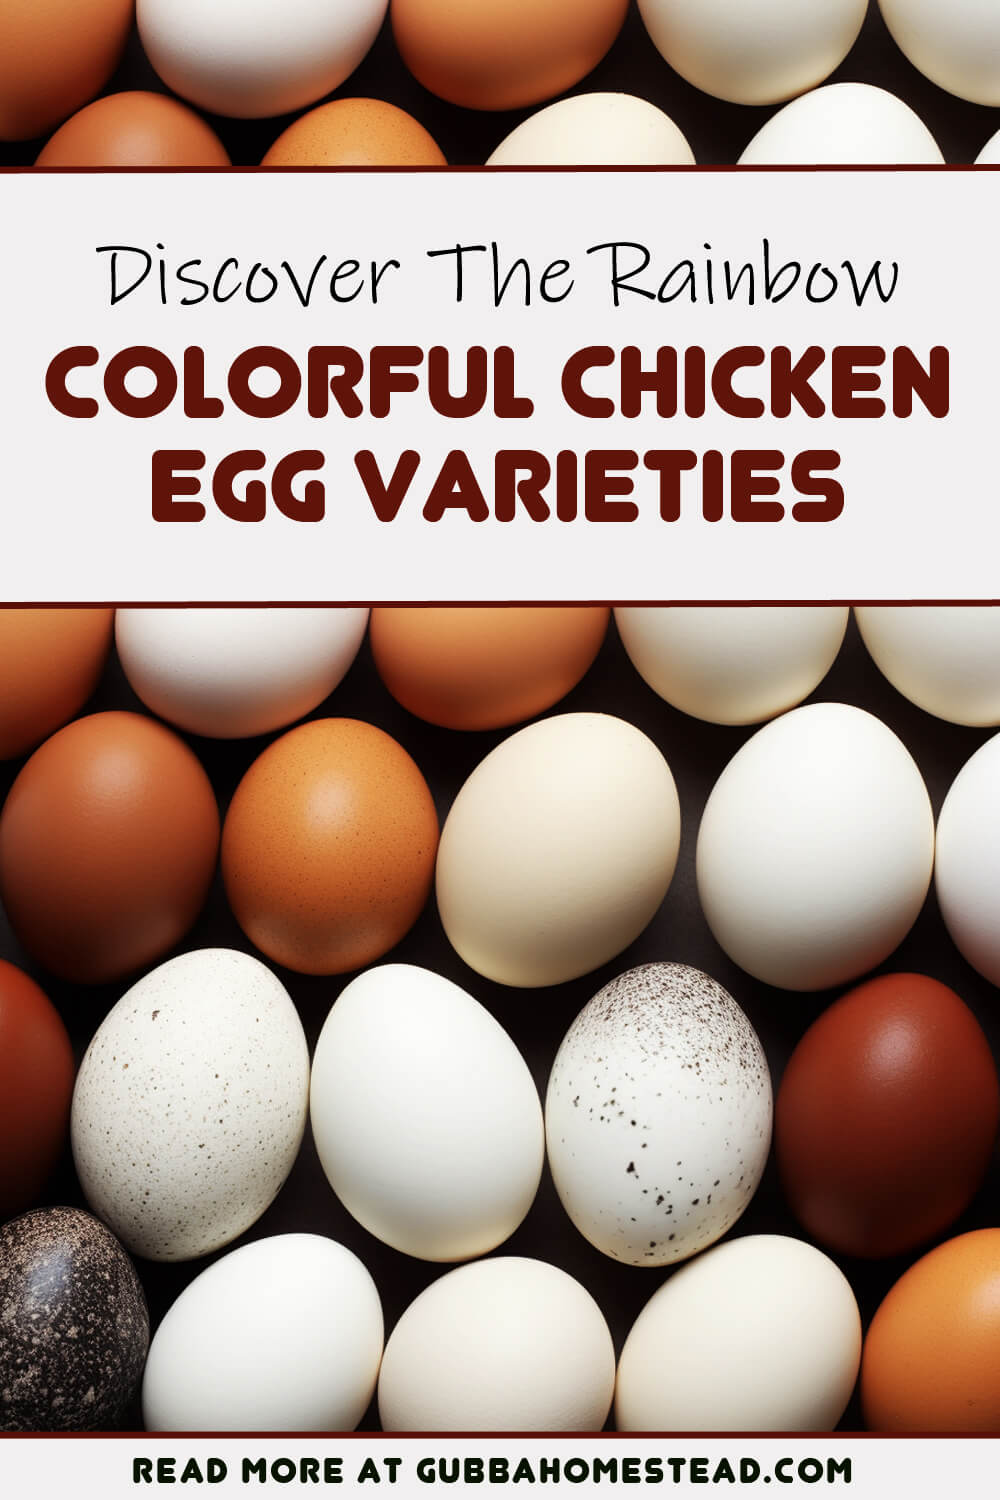 Discover the Rainbow: Colorful Chicken Egg Varieties